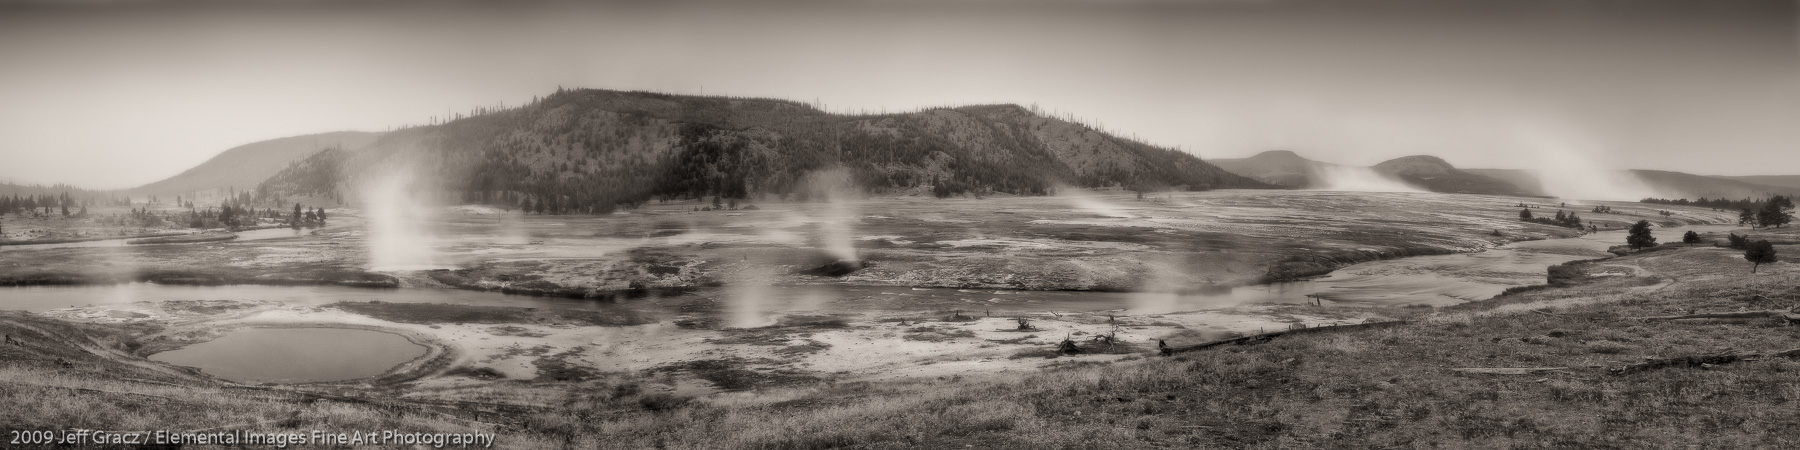 Midway Geyser Basin panoramic II |  | WY | USA - © 2009 Jeff Gracz / Elemental Images Fine Art Photography - All Rights Reserved Worldwide